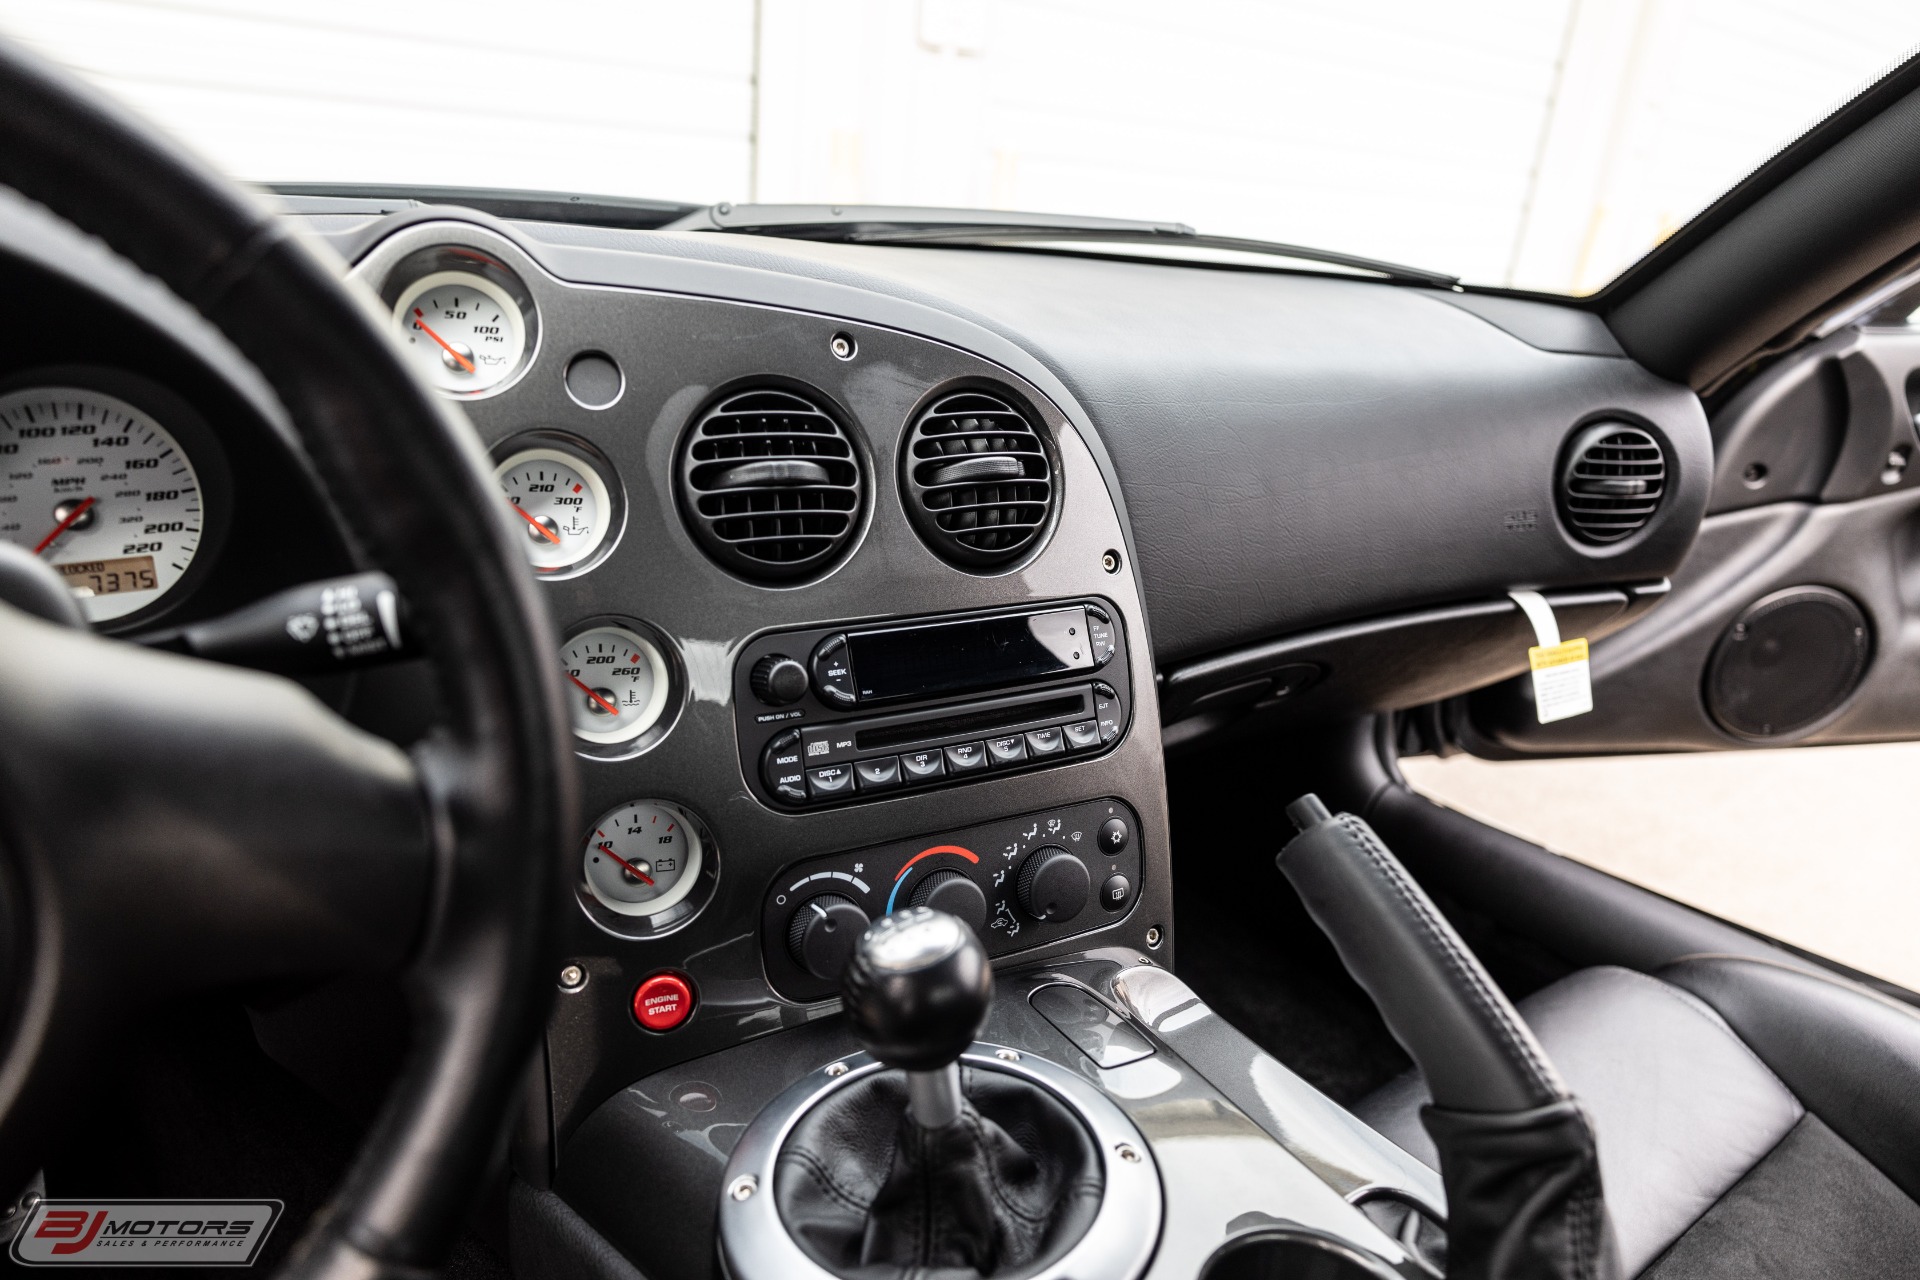 Used-2010-Dodge-Viper-ACR-VooDoo-Edition--18/31